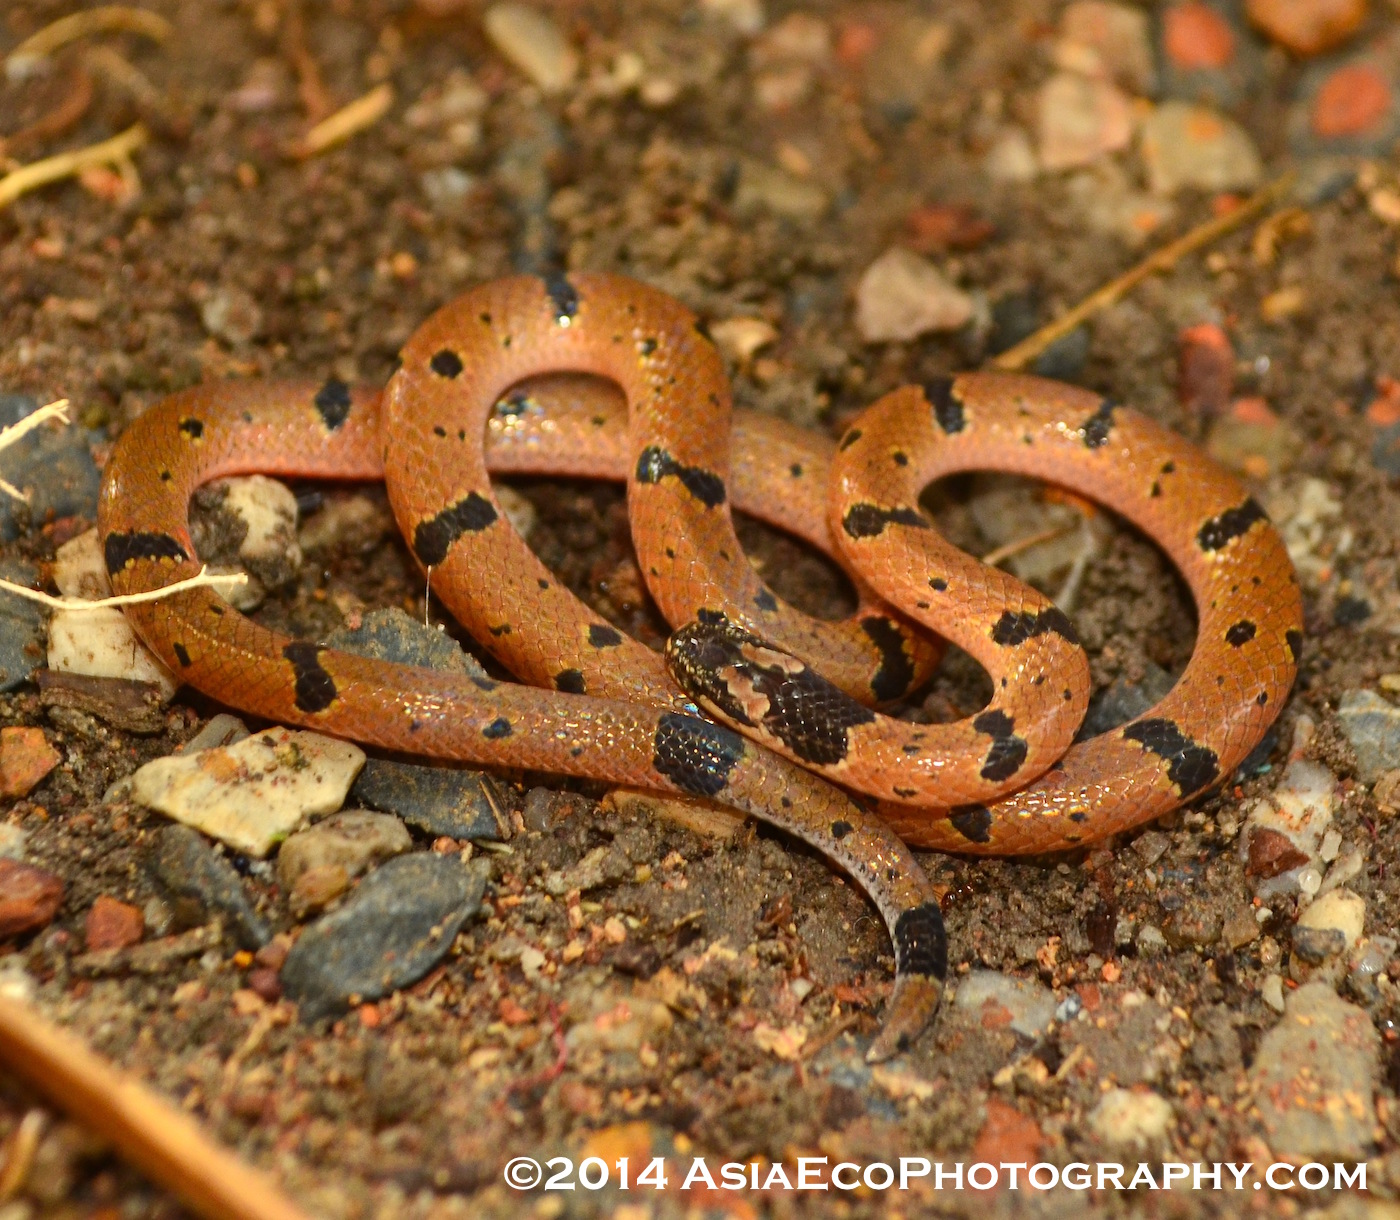 A small-spotted coral snake found in Krabi, Thailand during a photography field trip.